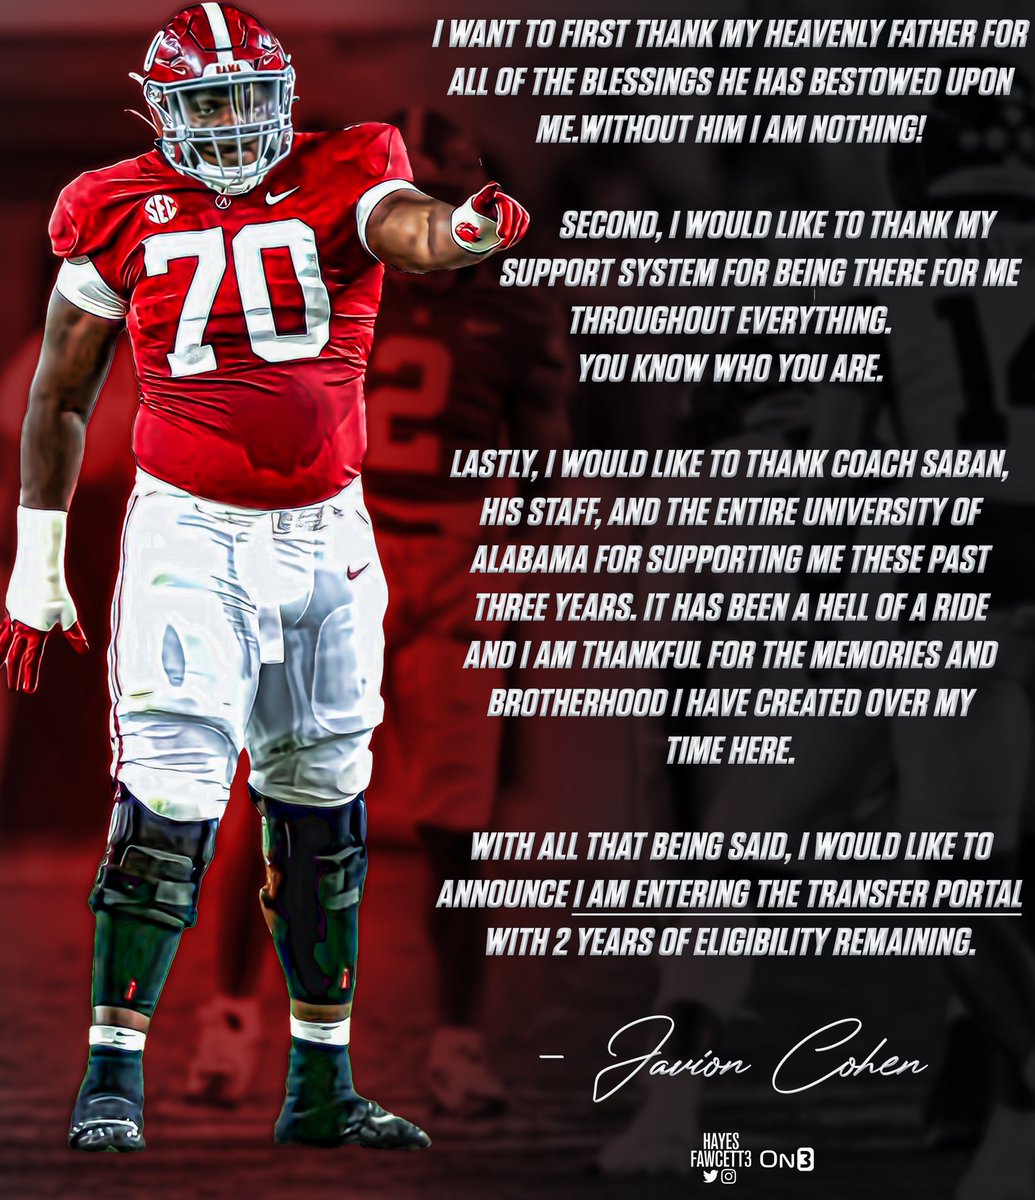 BREAKING: Alabama Offensive Guard Javion Cohen tells me he will enter the transfer portal. The 6’4 320 OG from Phenix City, AL was a two year starter at Alabama. The 2020 recruit held a total of 35 offers including Auburn, Florida, Oklahoma, and others. on3.com/transfer-porta…